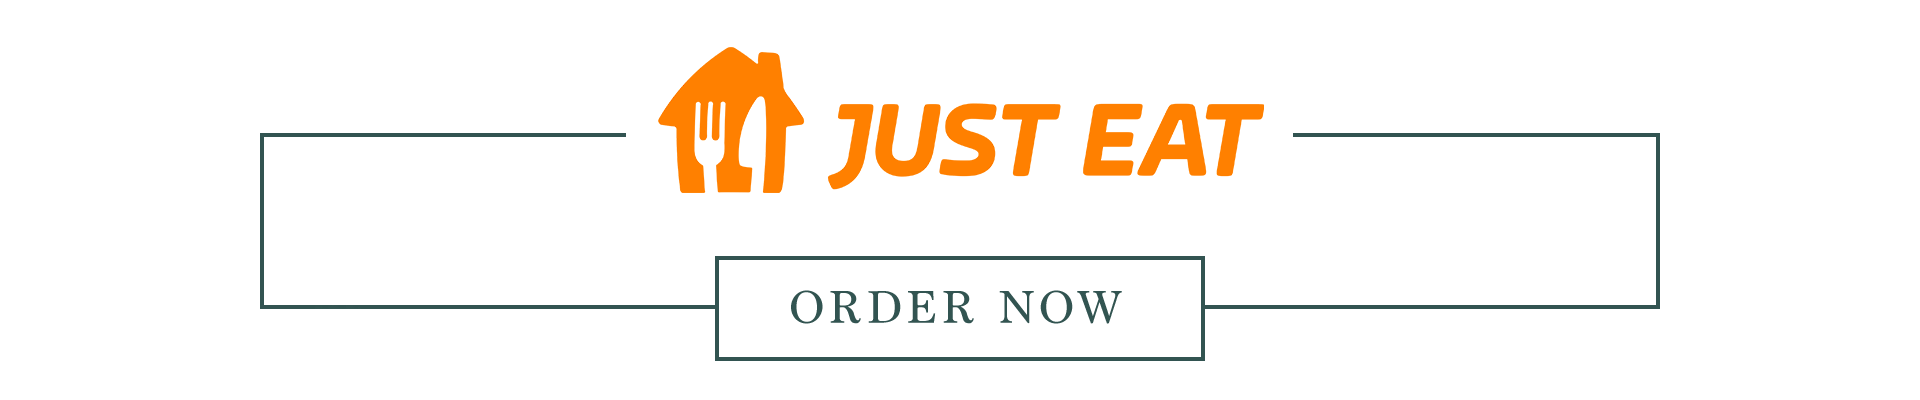 vv-justeat-justeat-thin-banner.png